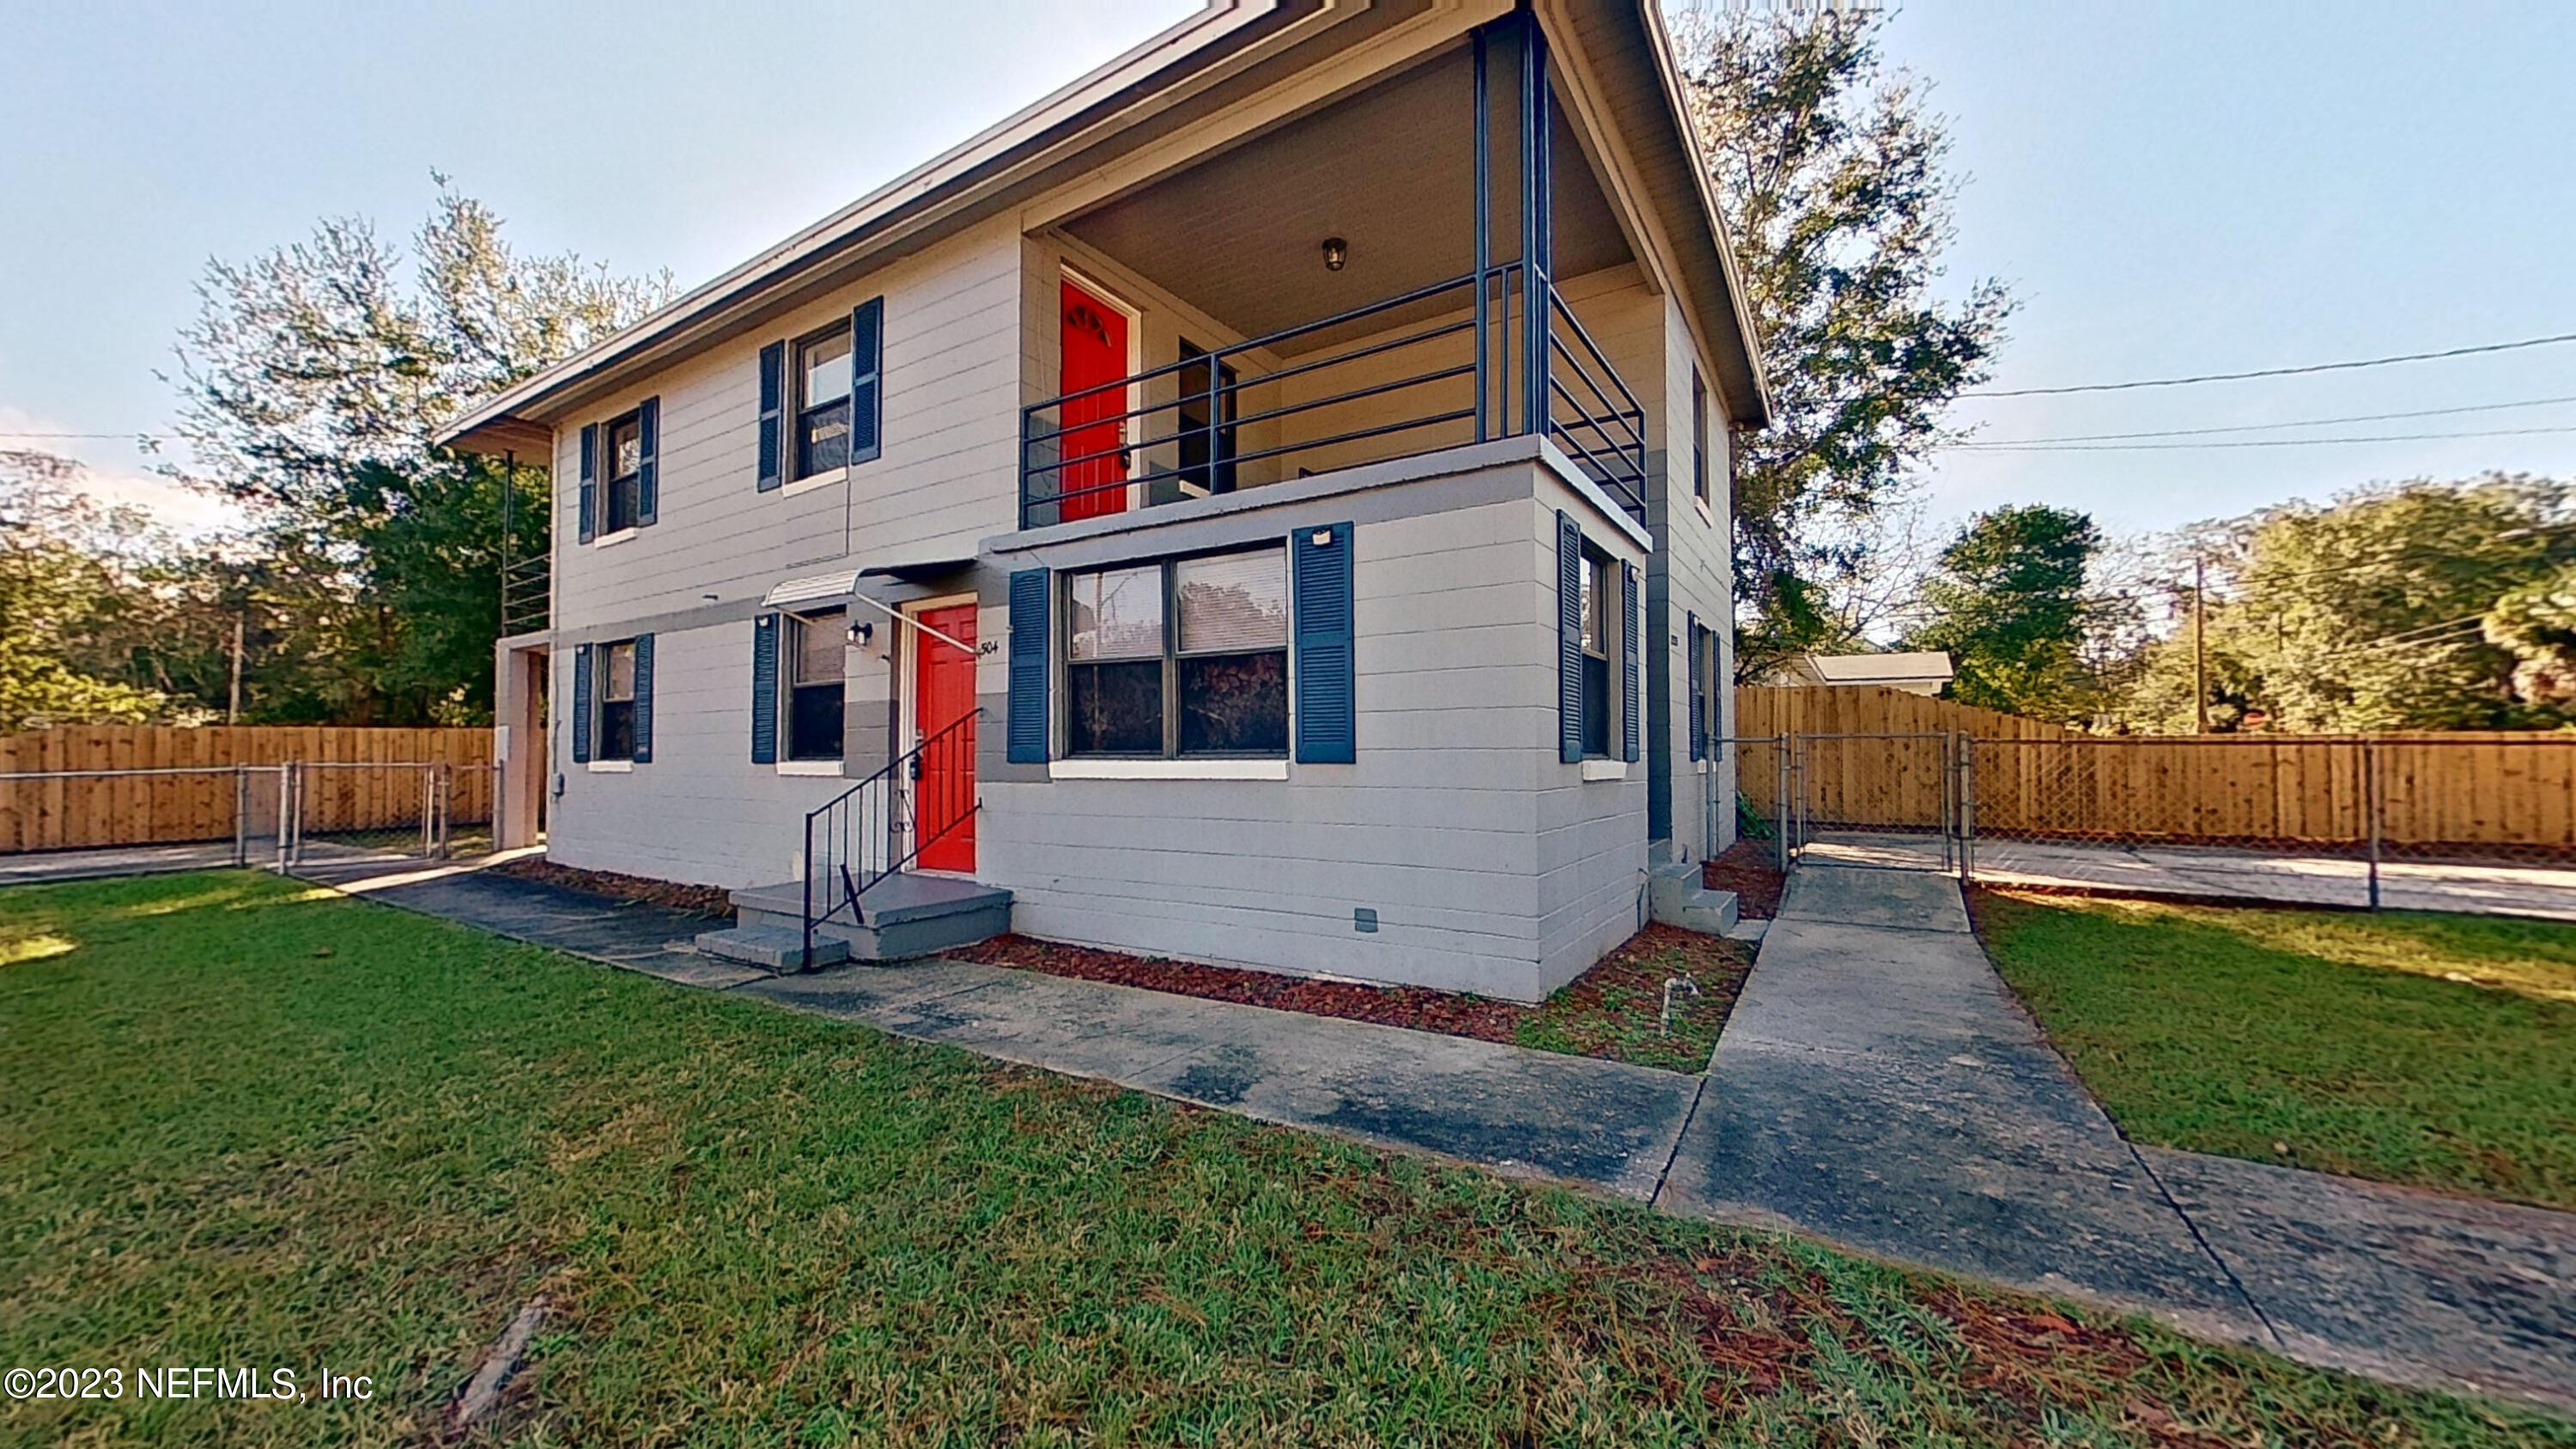 Jacksonville, FL home for sale located at 504 E 64TH Street, Jacksonville, FL 32208